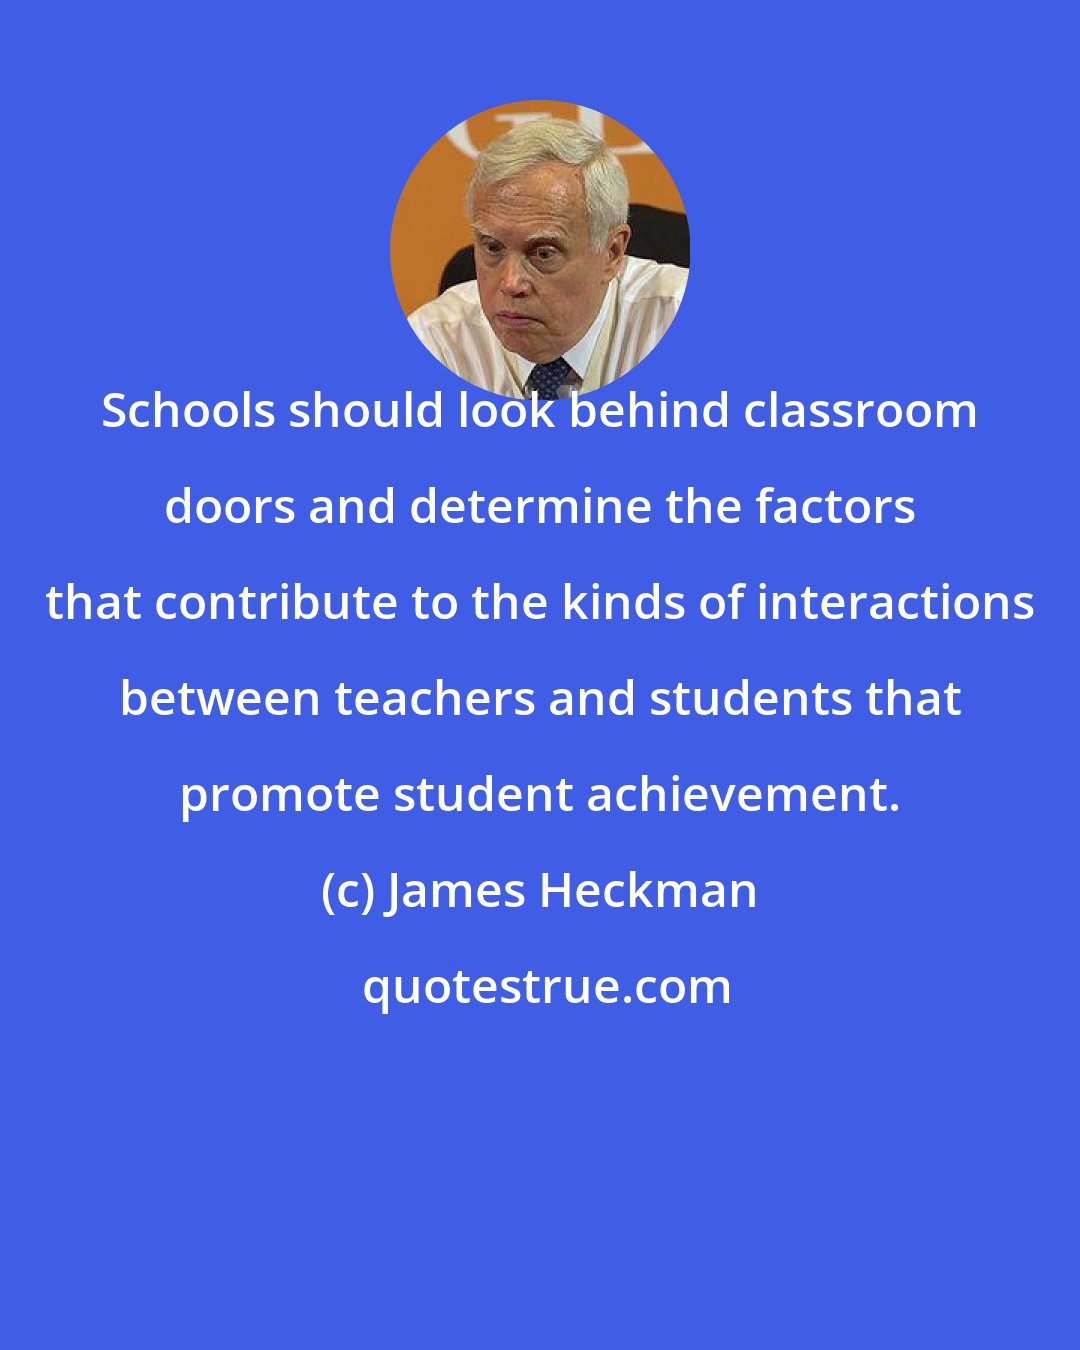 James Heckman: Schools should look behind classroom doors and determine the factors that contribute to the kinds of interactions between teachers and students that promote student achievement.